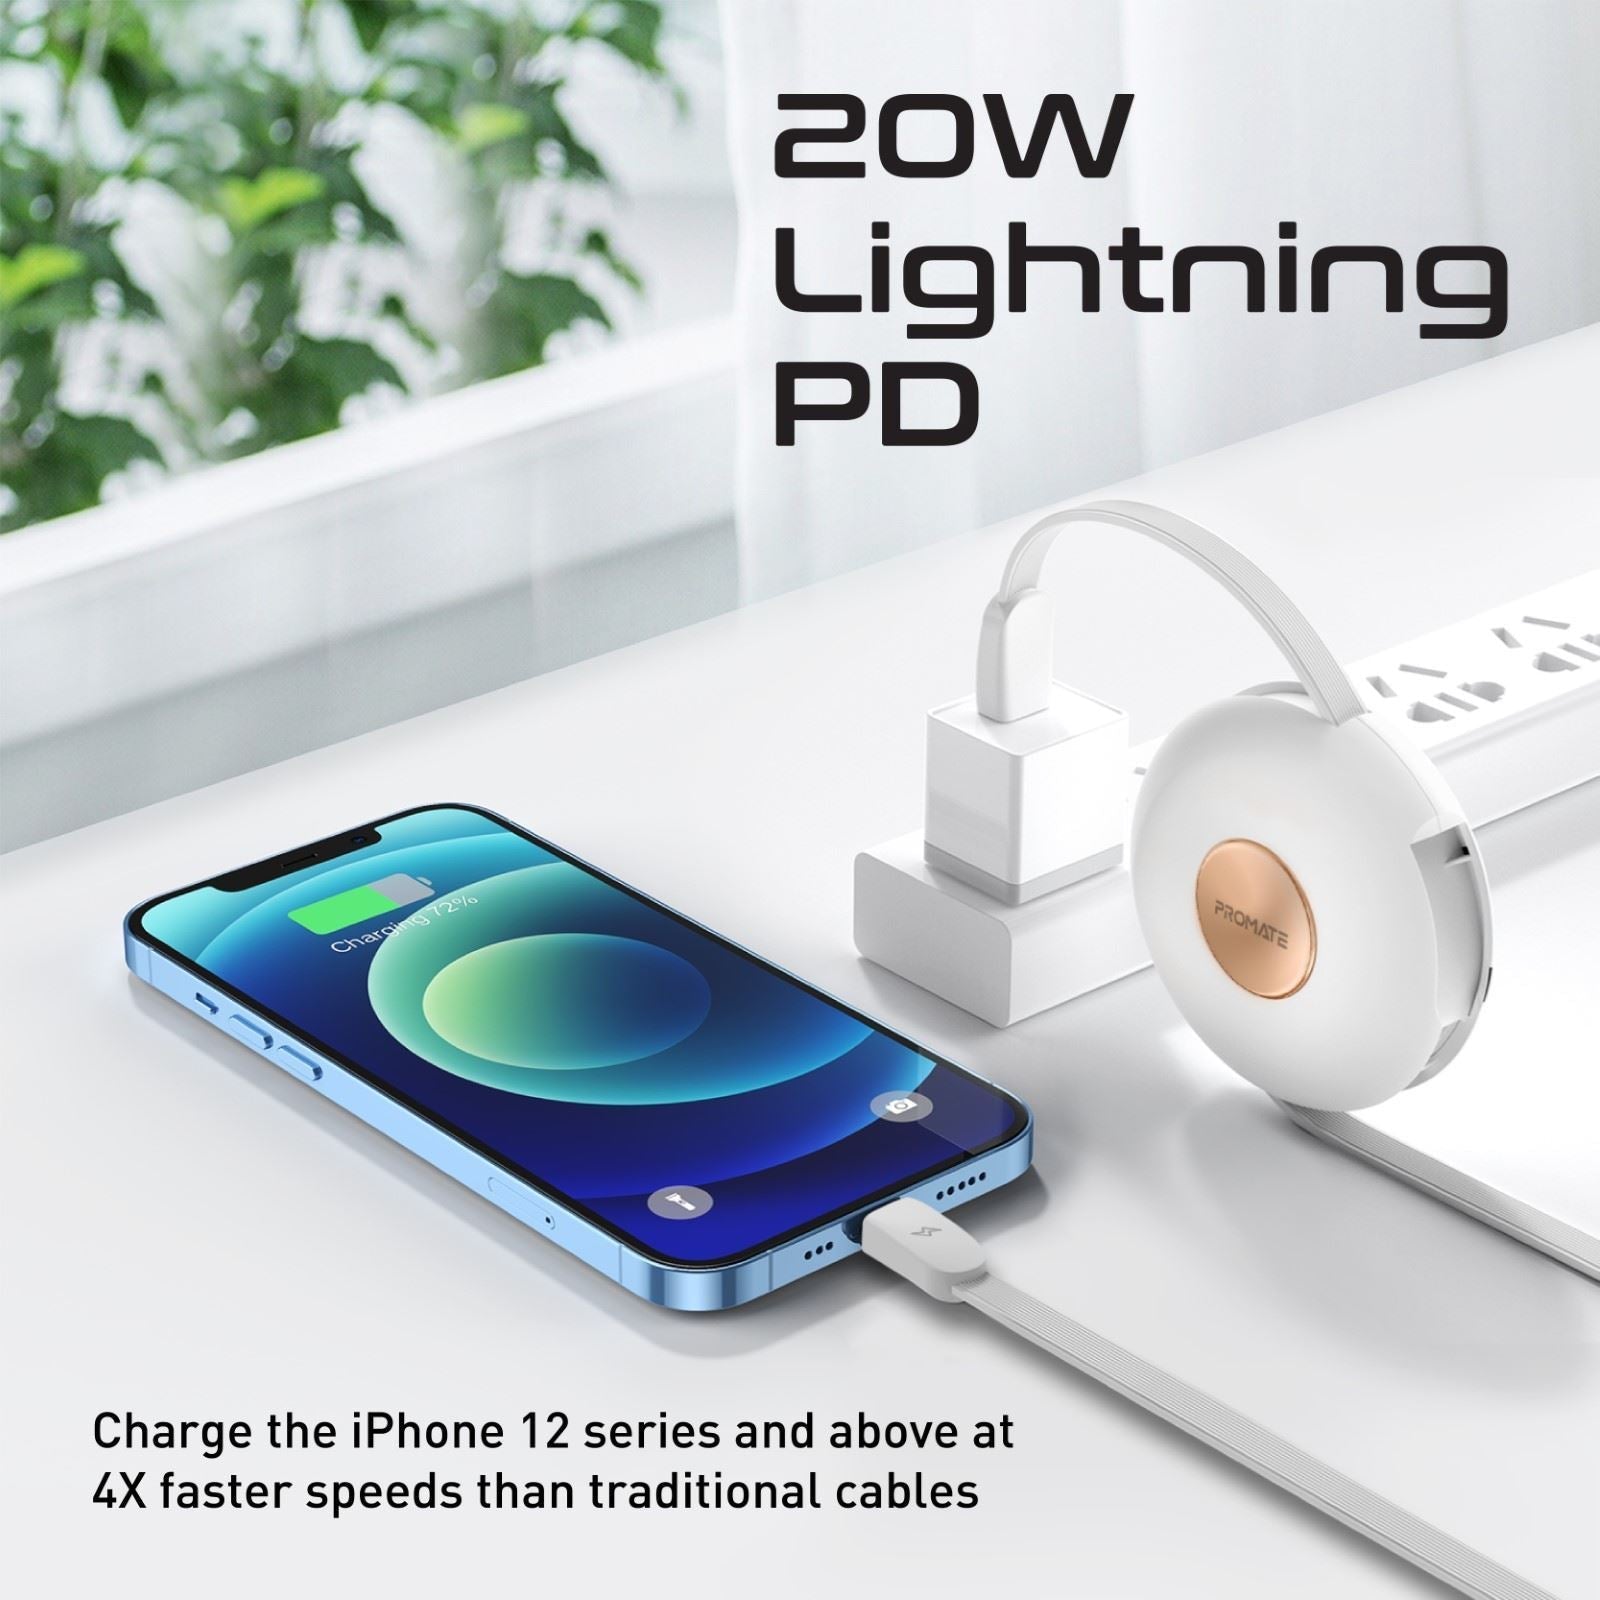 PROMATE_3in1_USB-C_Retractable_Data_&_Charge_Cable_with_Changeable_Magnetic_Connectors._Includes_USB-C_Micro-USB_&_Lightning_Connectors._Supports_60W_USB-C_&_20W_Lightning_Auto_Recoil._White_Colour 1747